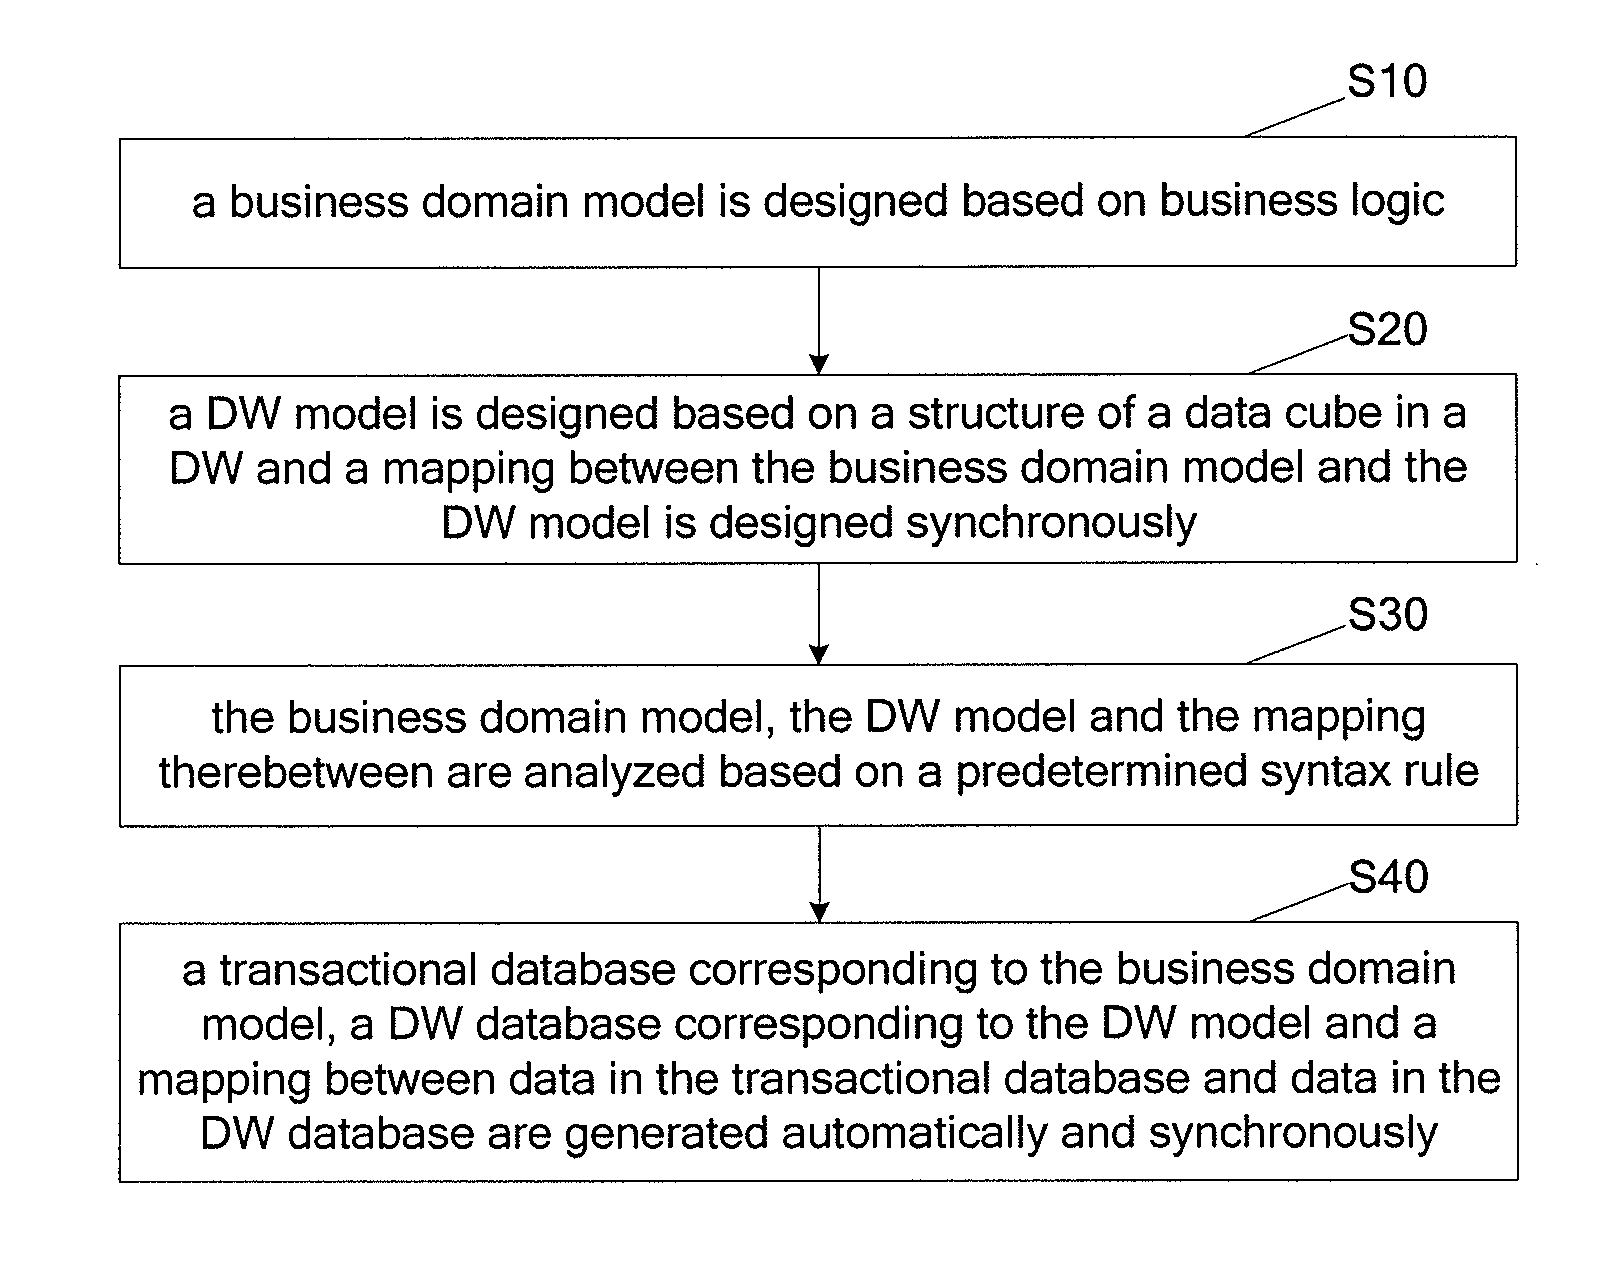 Method and system for designing business domain model, data warehouse model and mapping therebetween synchronously